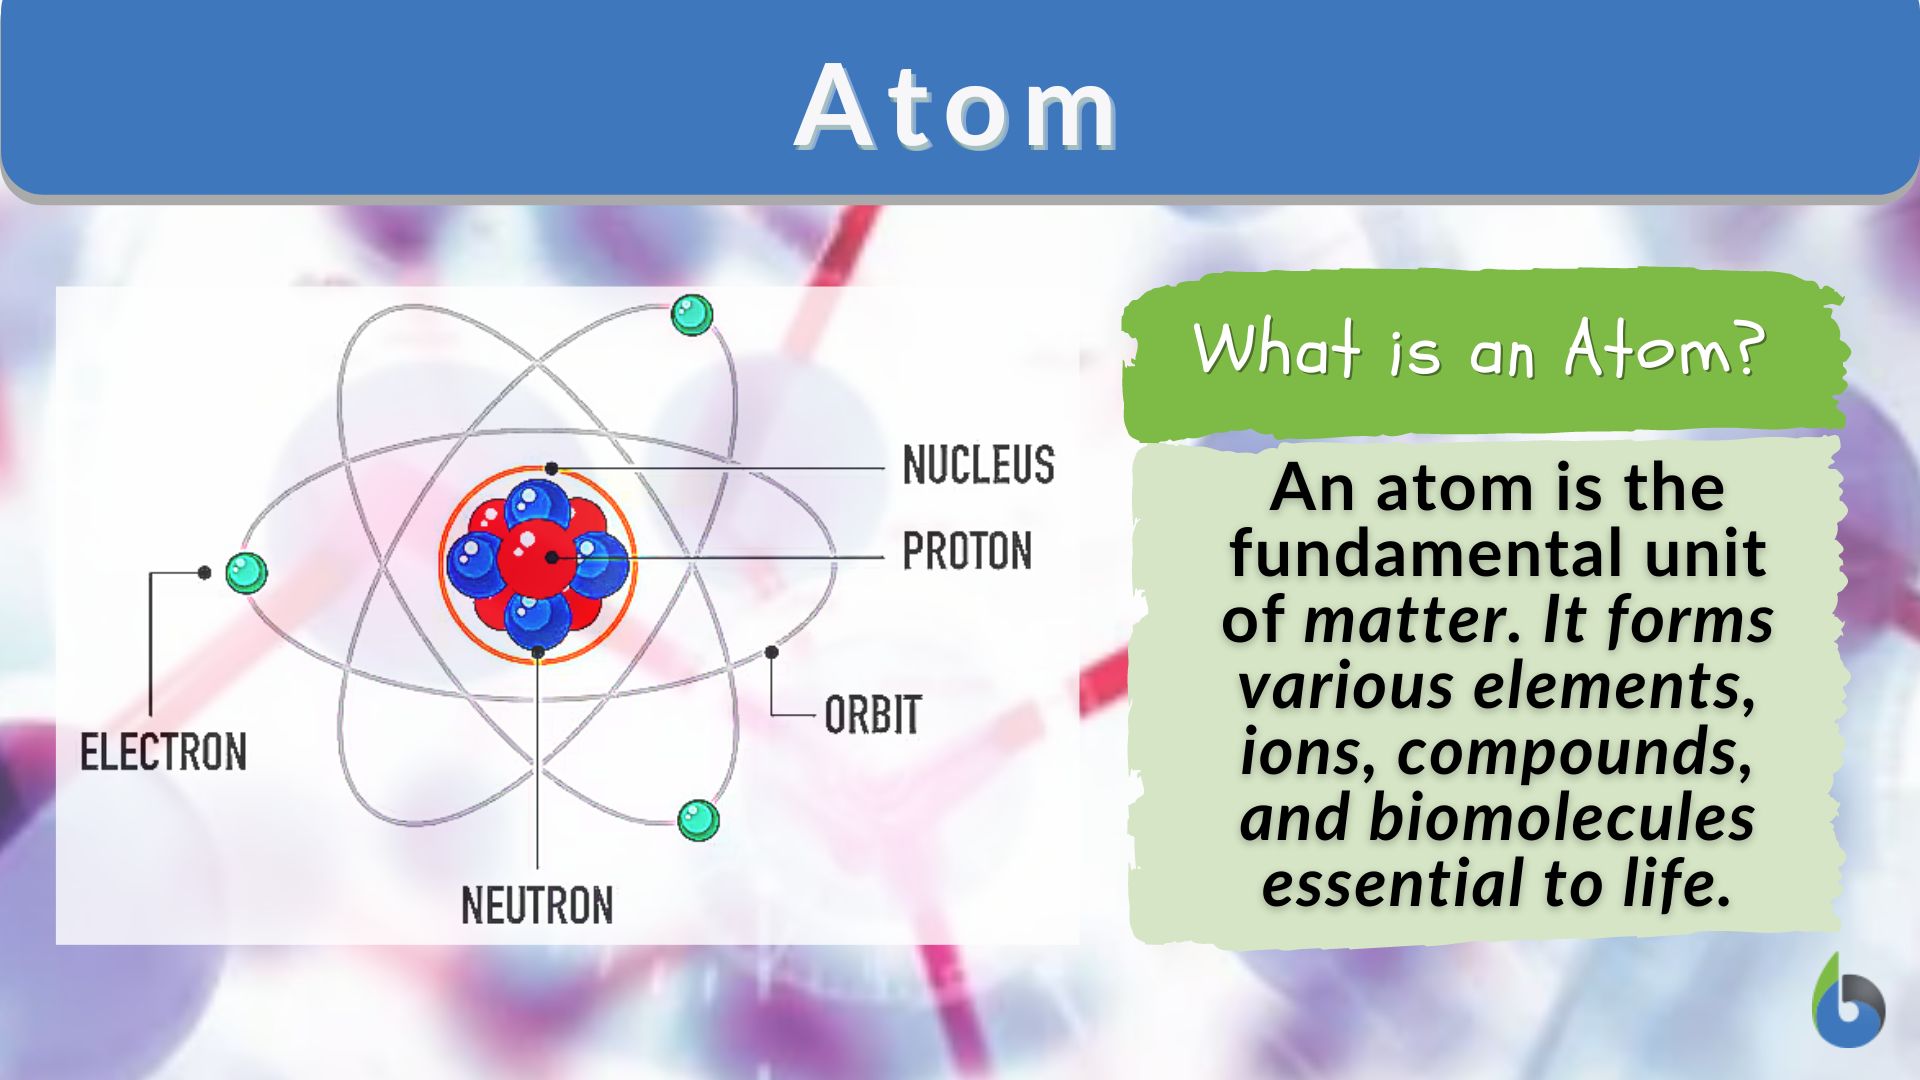 Which is greater? The number of atoms in the universe or the